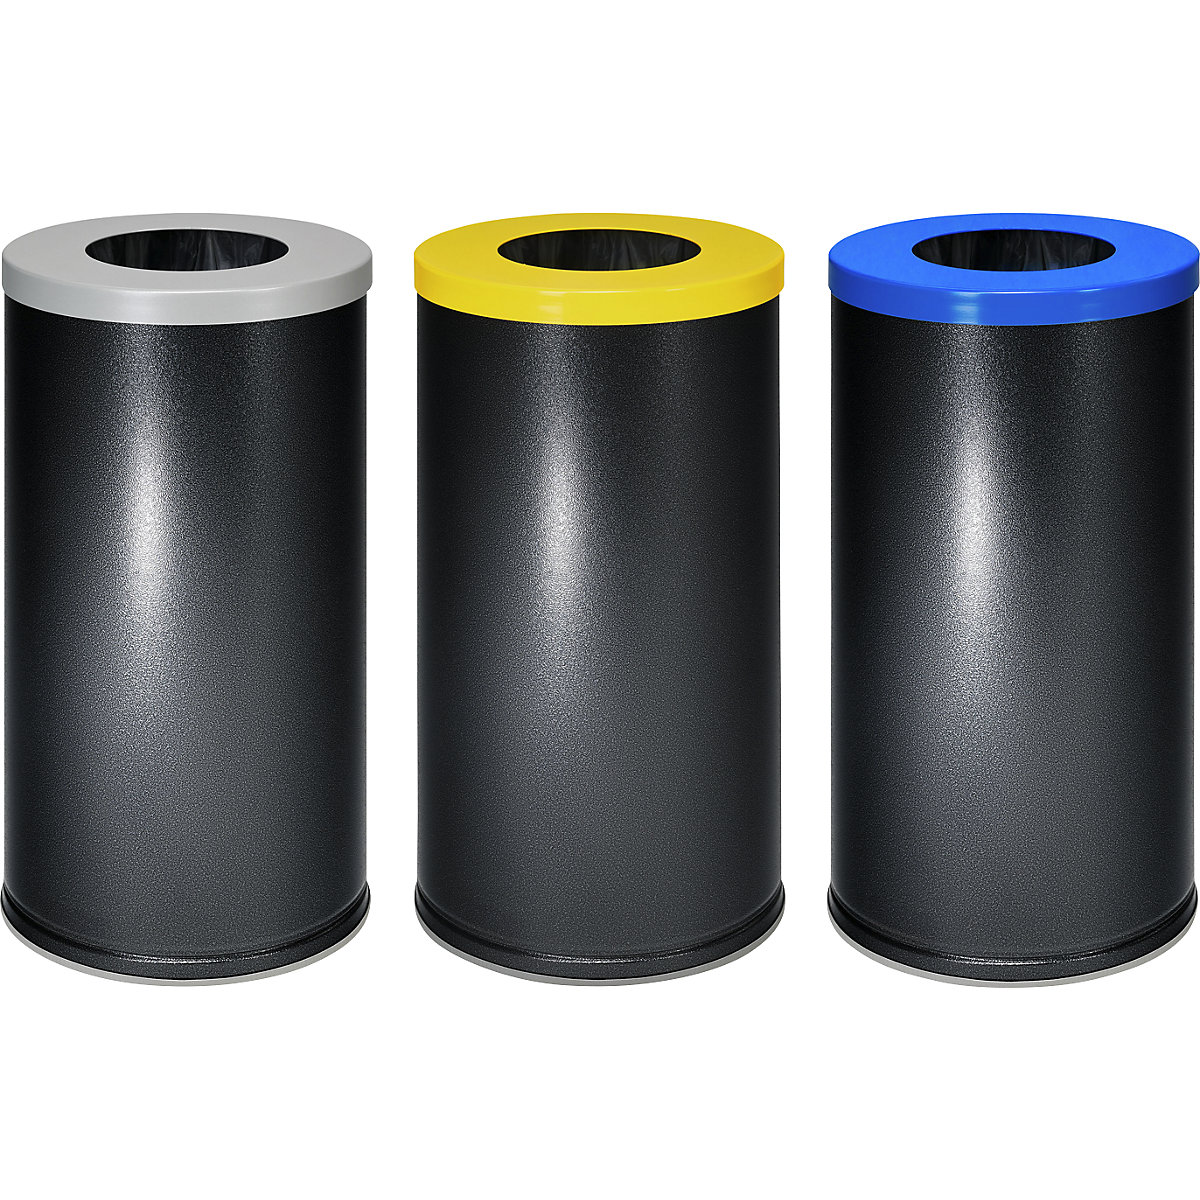 Set of 3 recyclable waste collectors – eurokraft basic